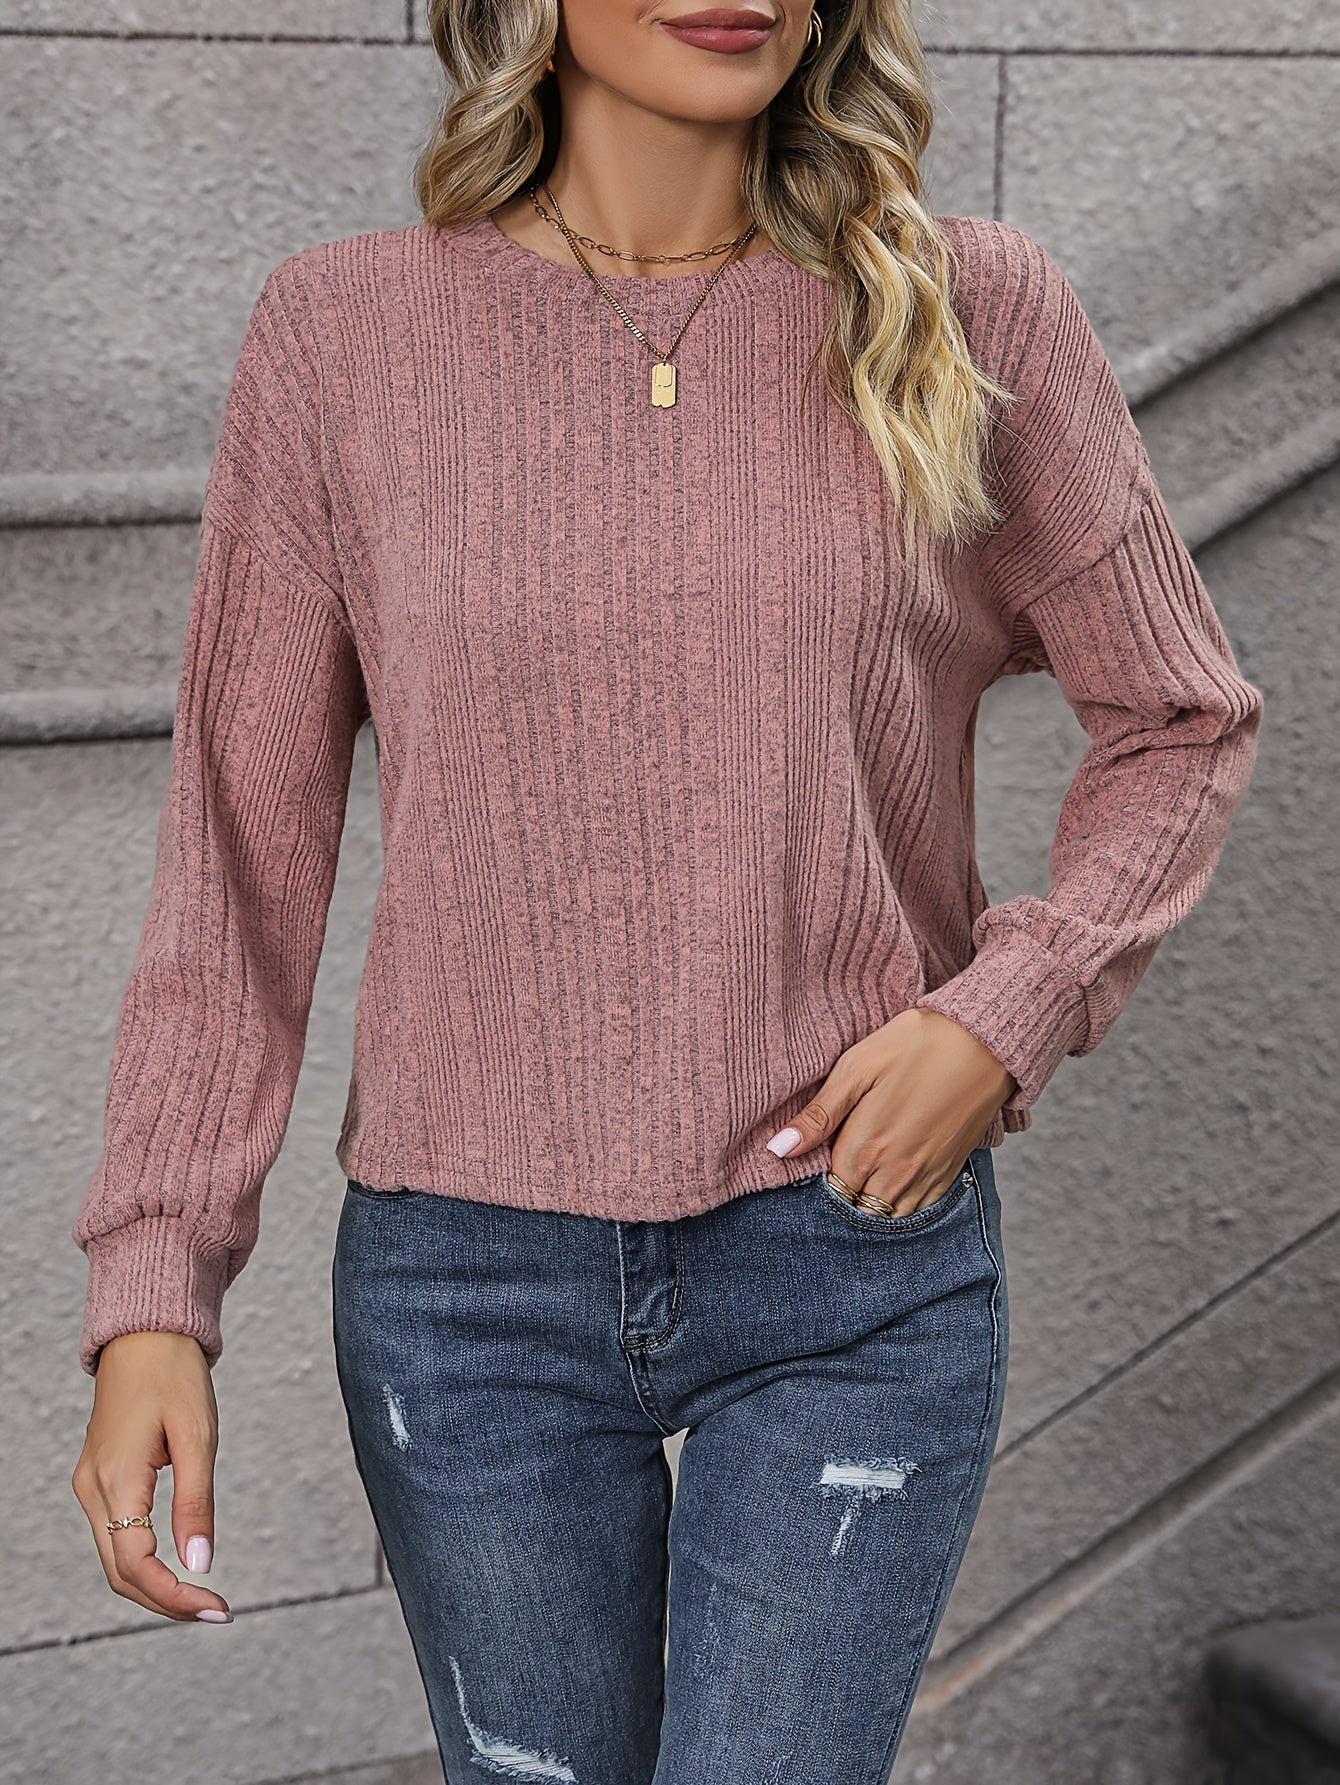 vlovelaw Solid Crew Neck Pullover Sweater, Casual Long Sleeve Sweater For Spring & Fall, Women's Clothing